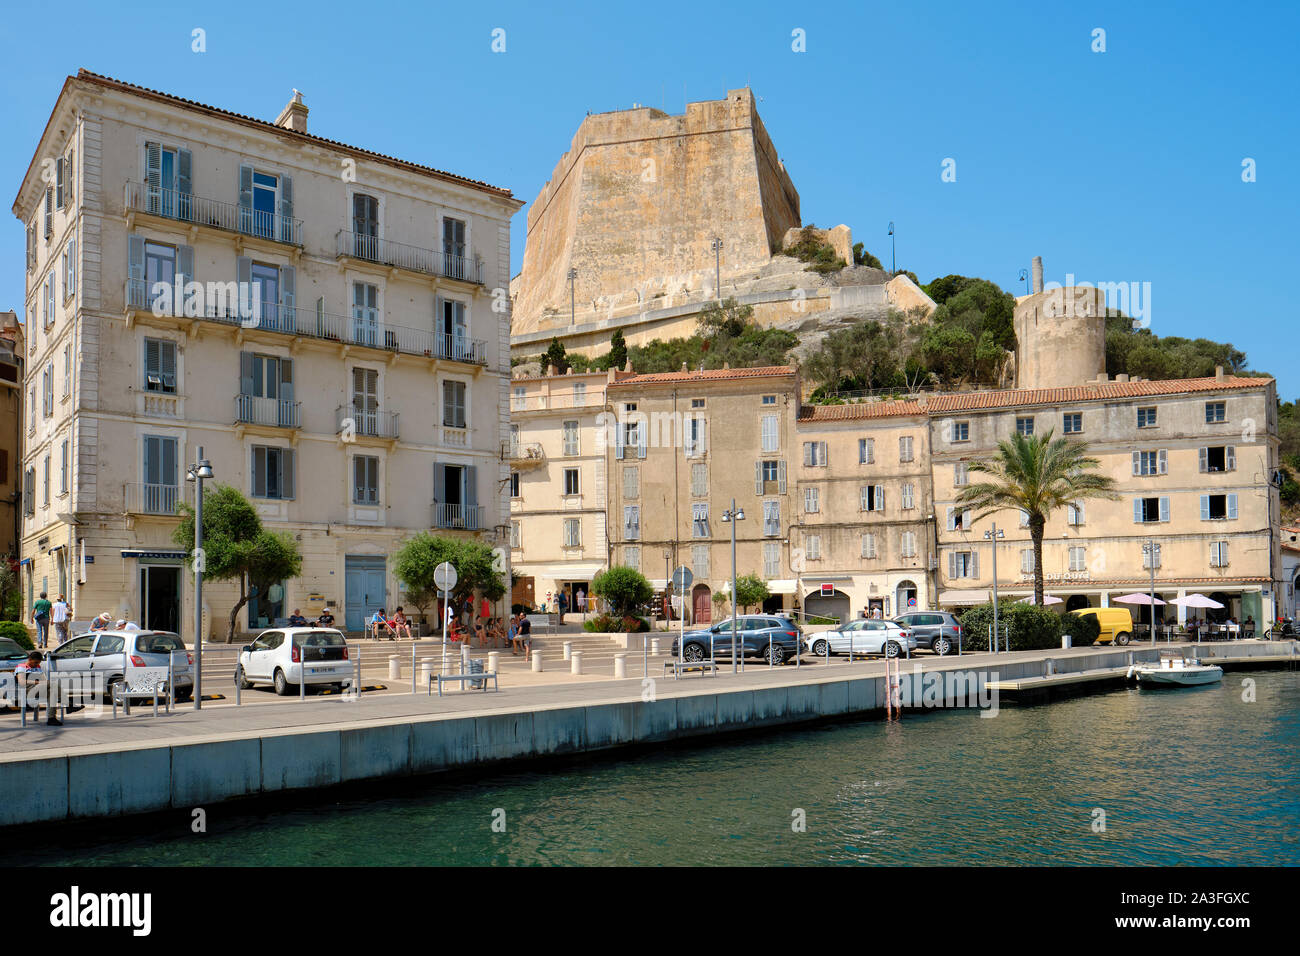 The citadel harbour and town of Bonifacio on the southern tip of the French island of Corsica - Corse du Sud France. Stock Photo